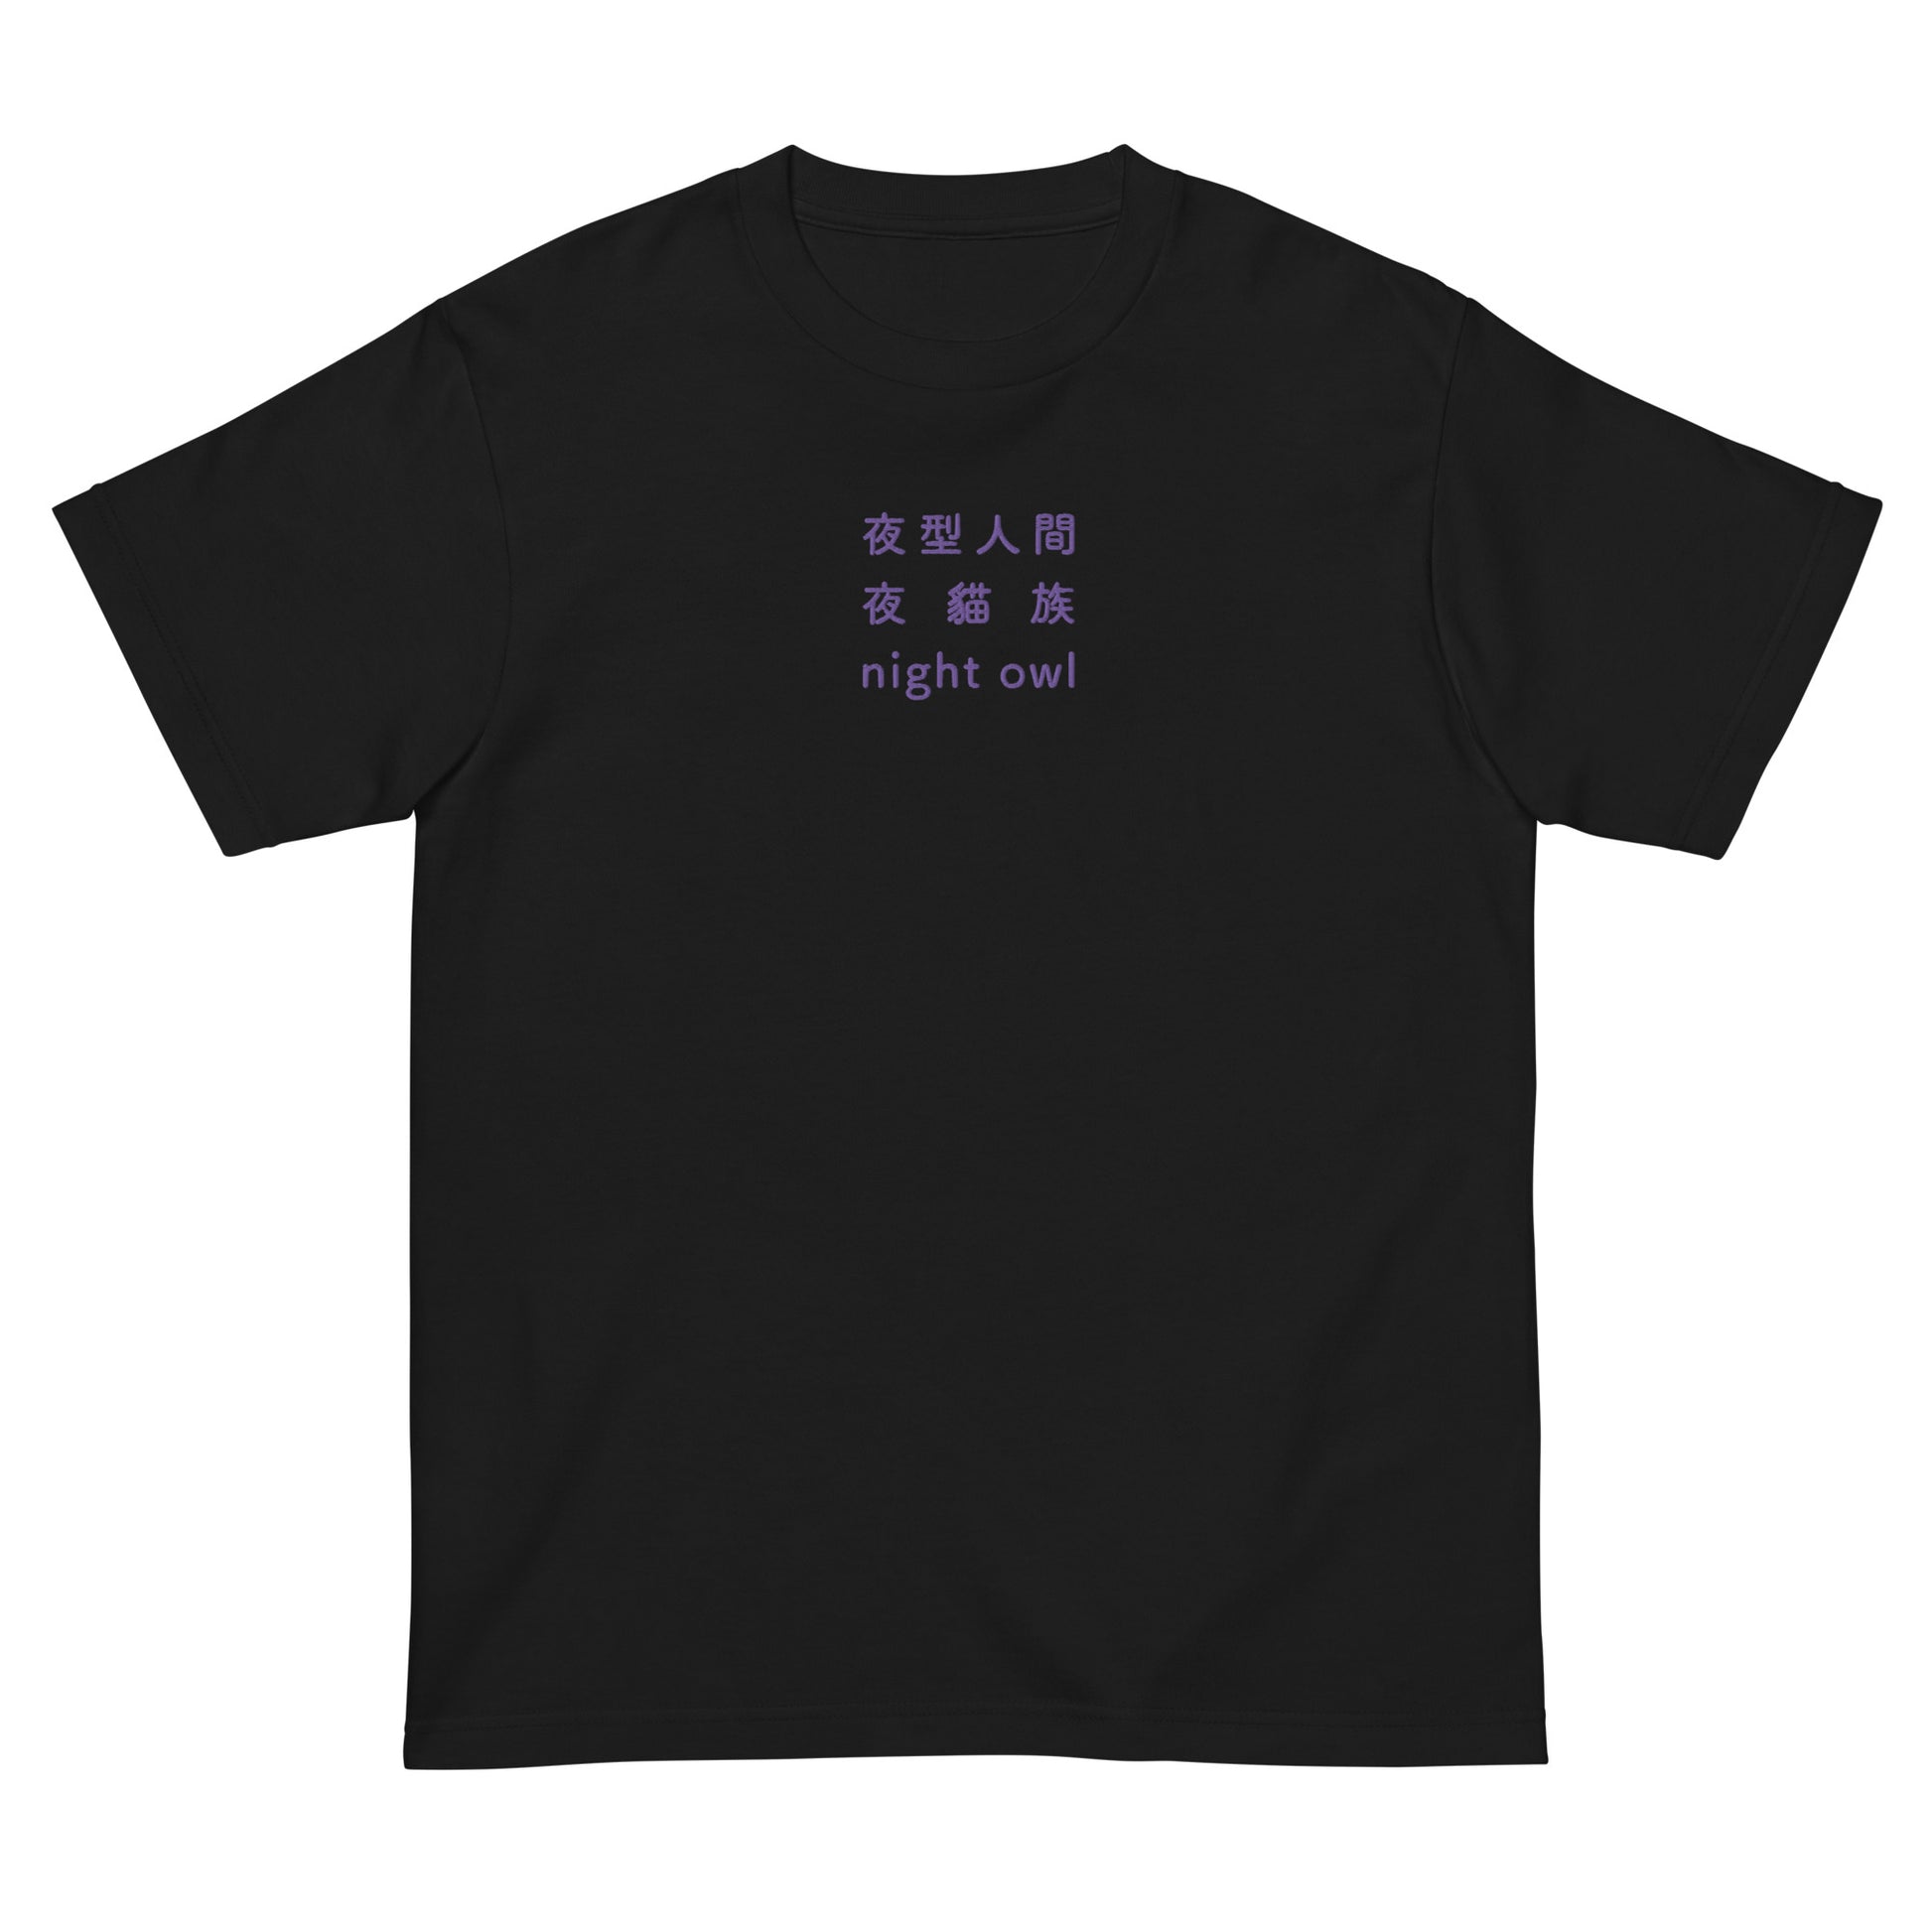 Black High Quality Tee - Front Design with an Purple Embroidery "Night Owl" in Japanese,Chinese and English